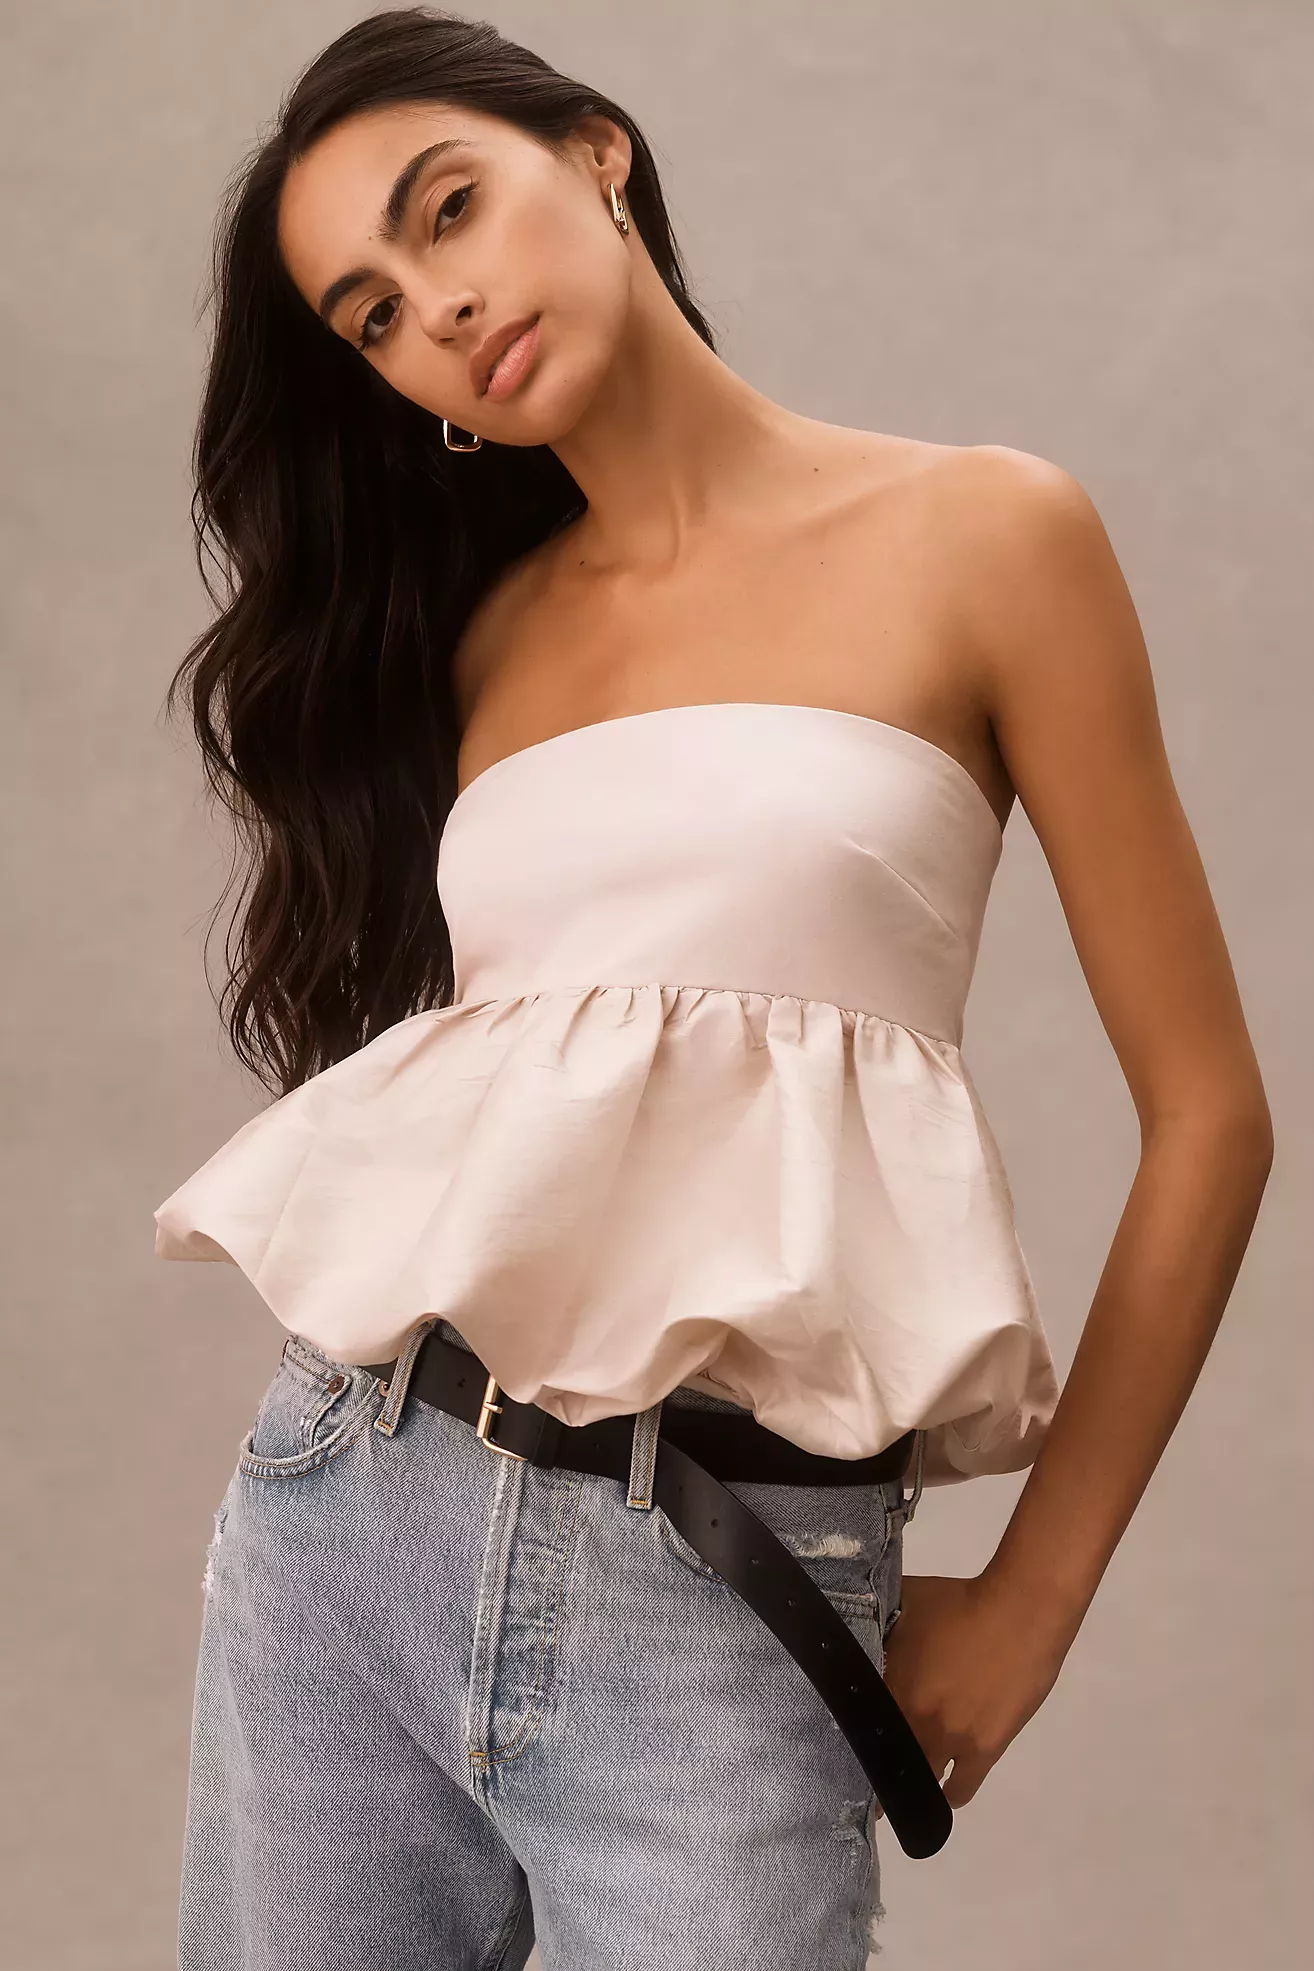 By Anthropologie Strapless Ruffle Top